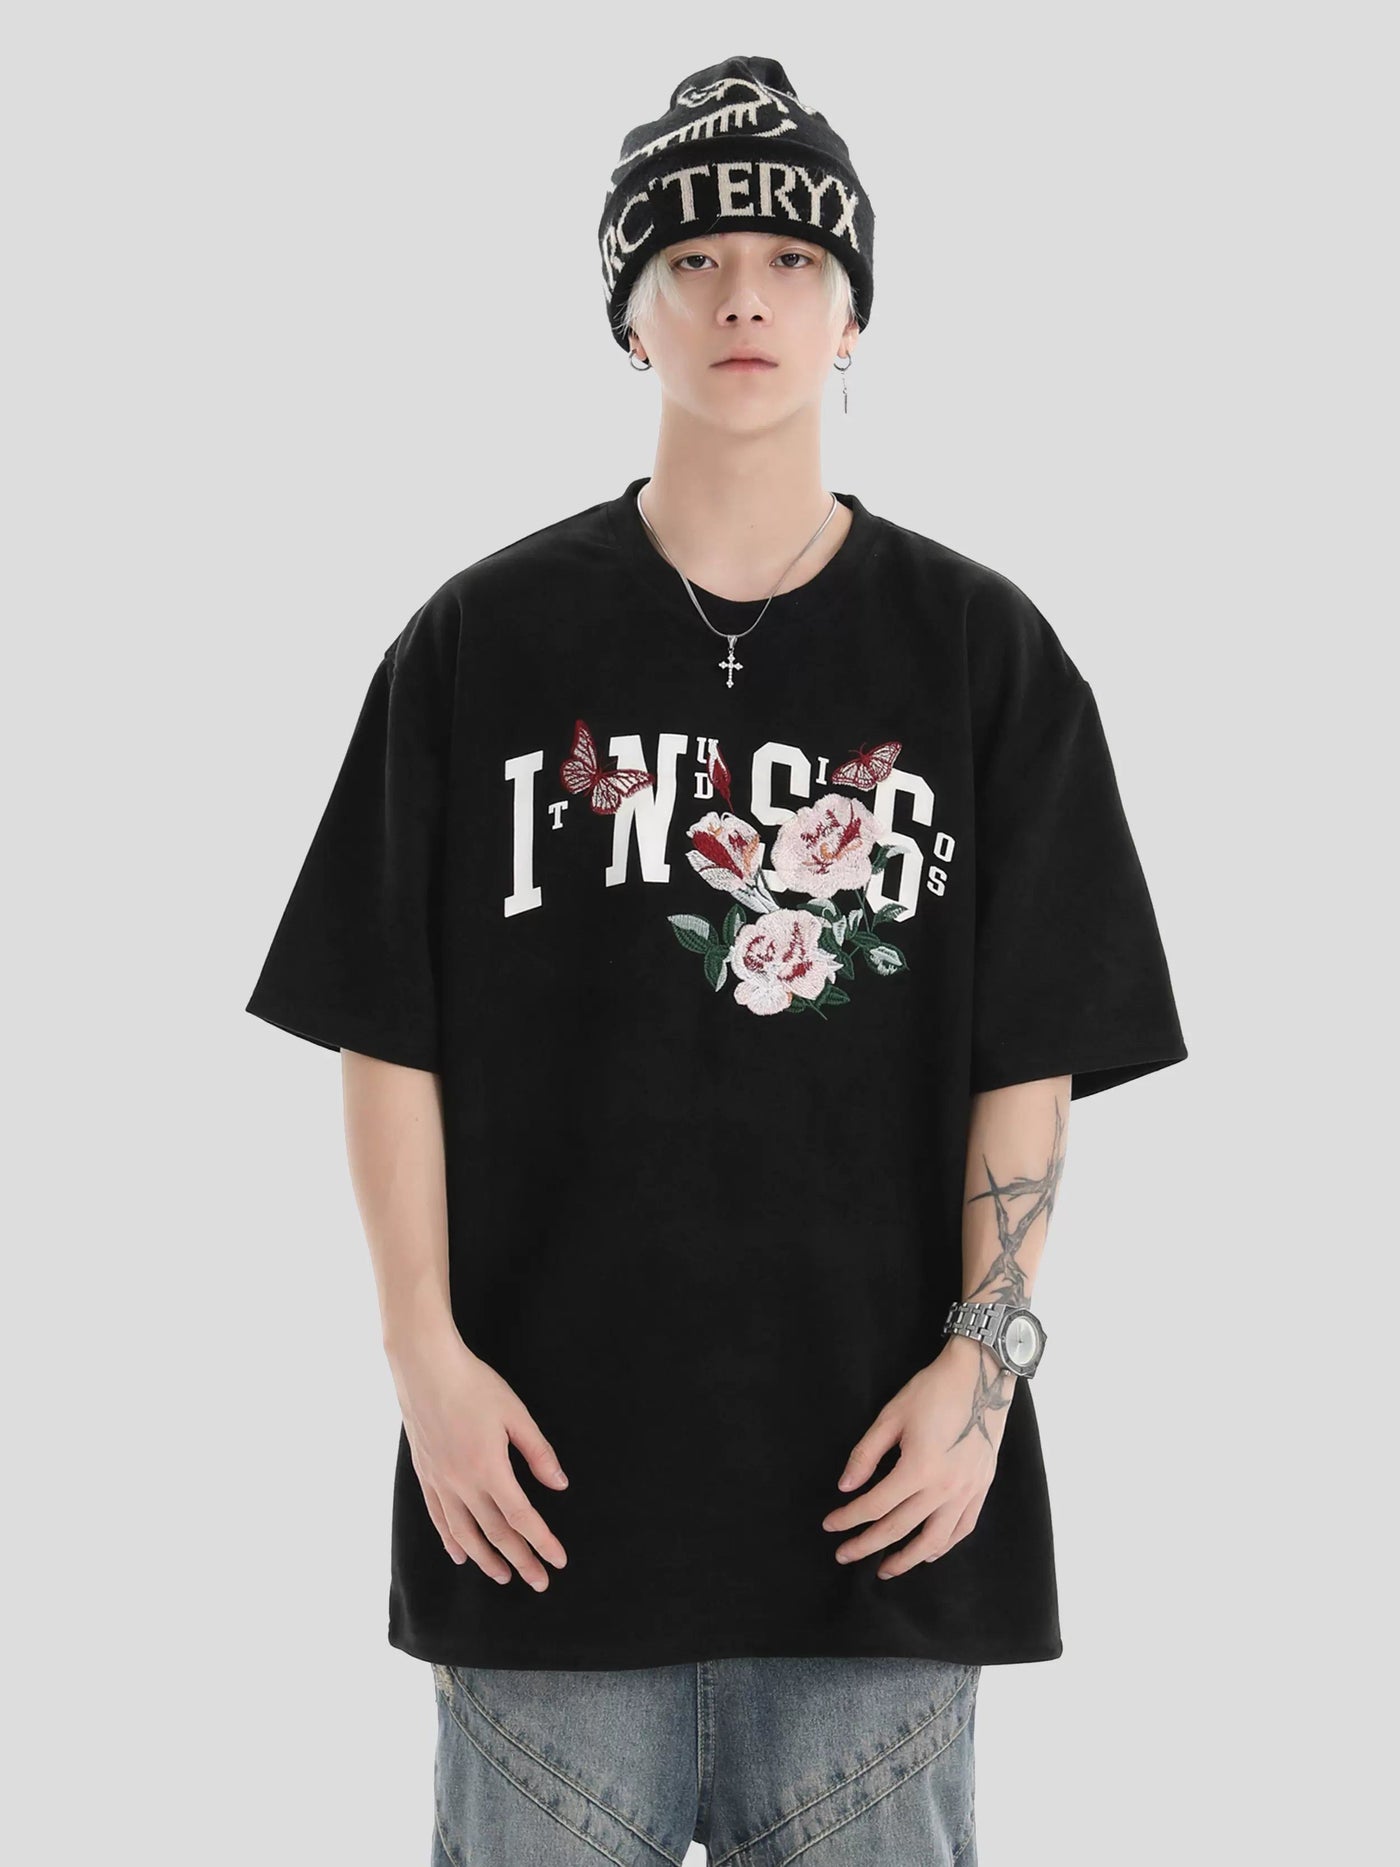 Stitched Flowers and Roses T-Shirt Korean Street Fashion T-Shirt By INS Korea Shop Online at OH Vault